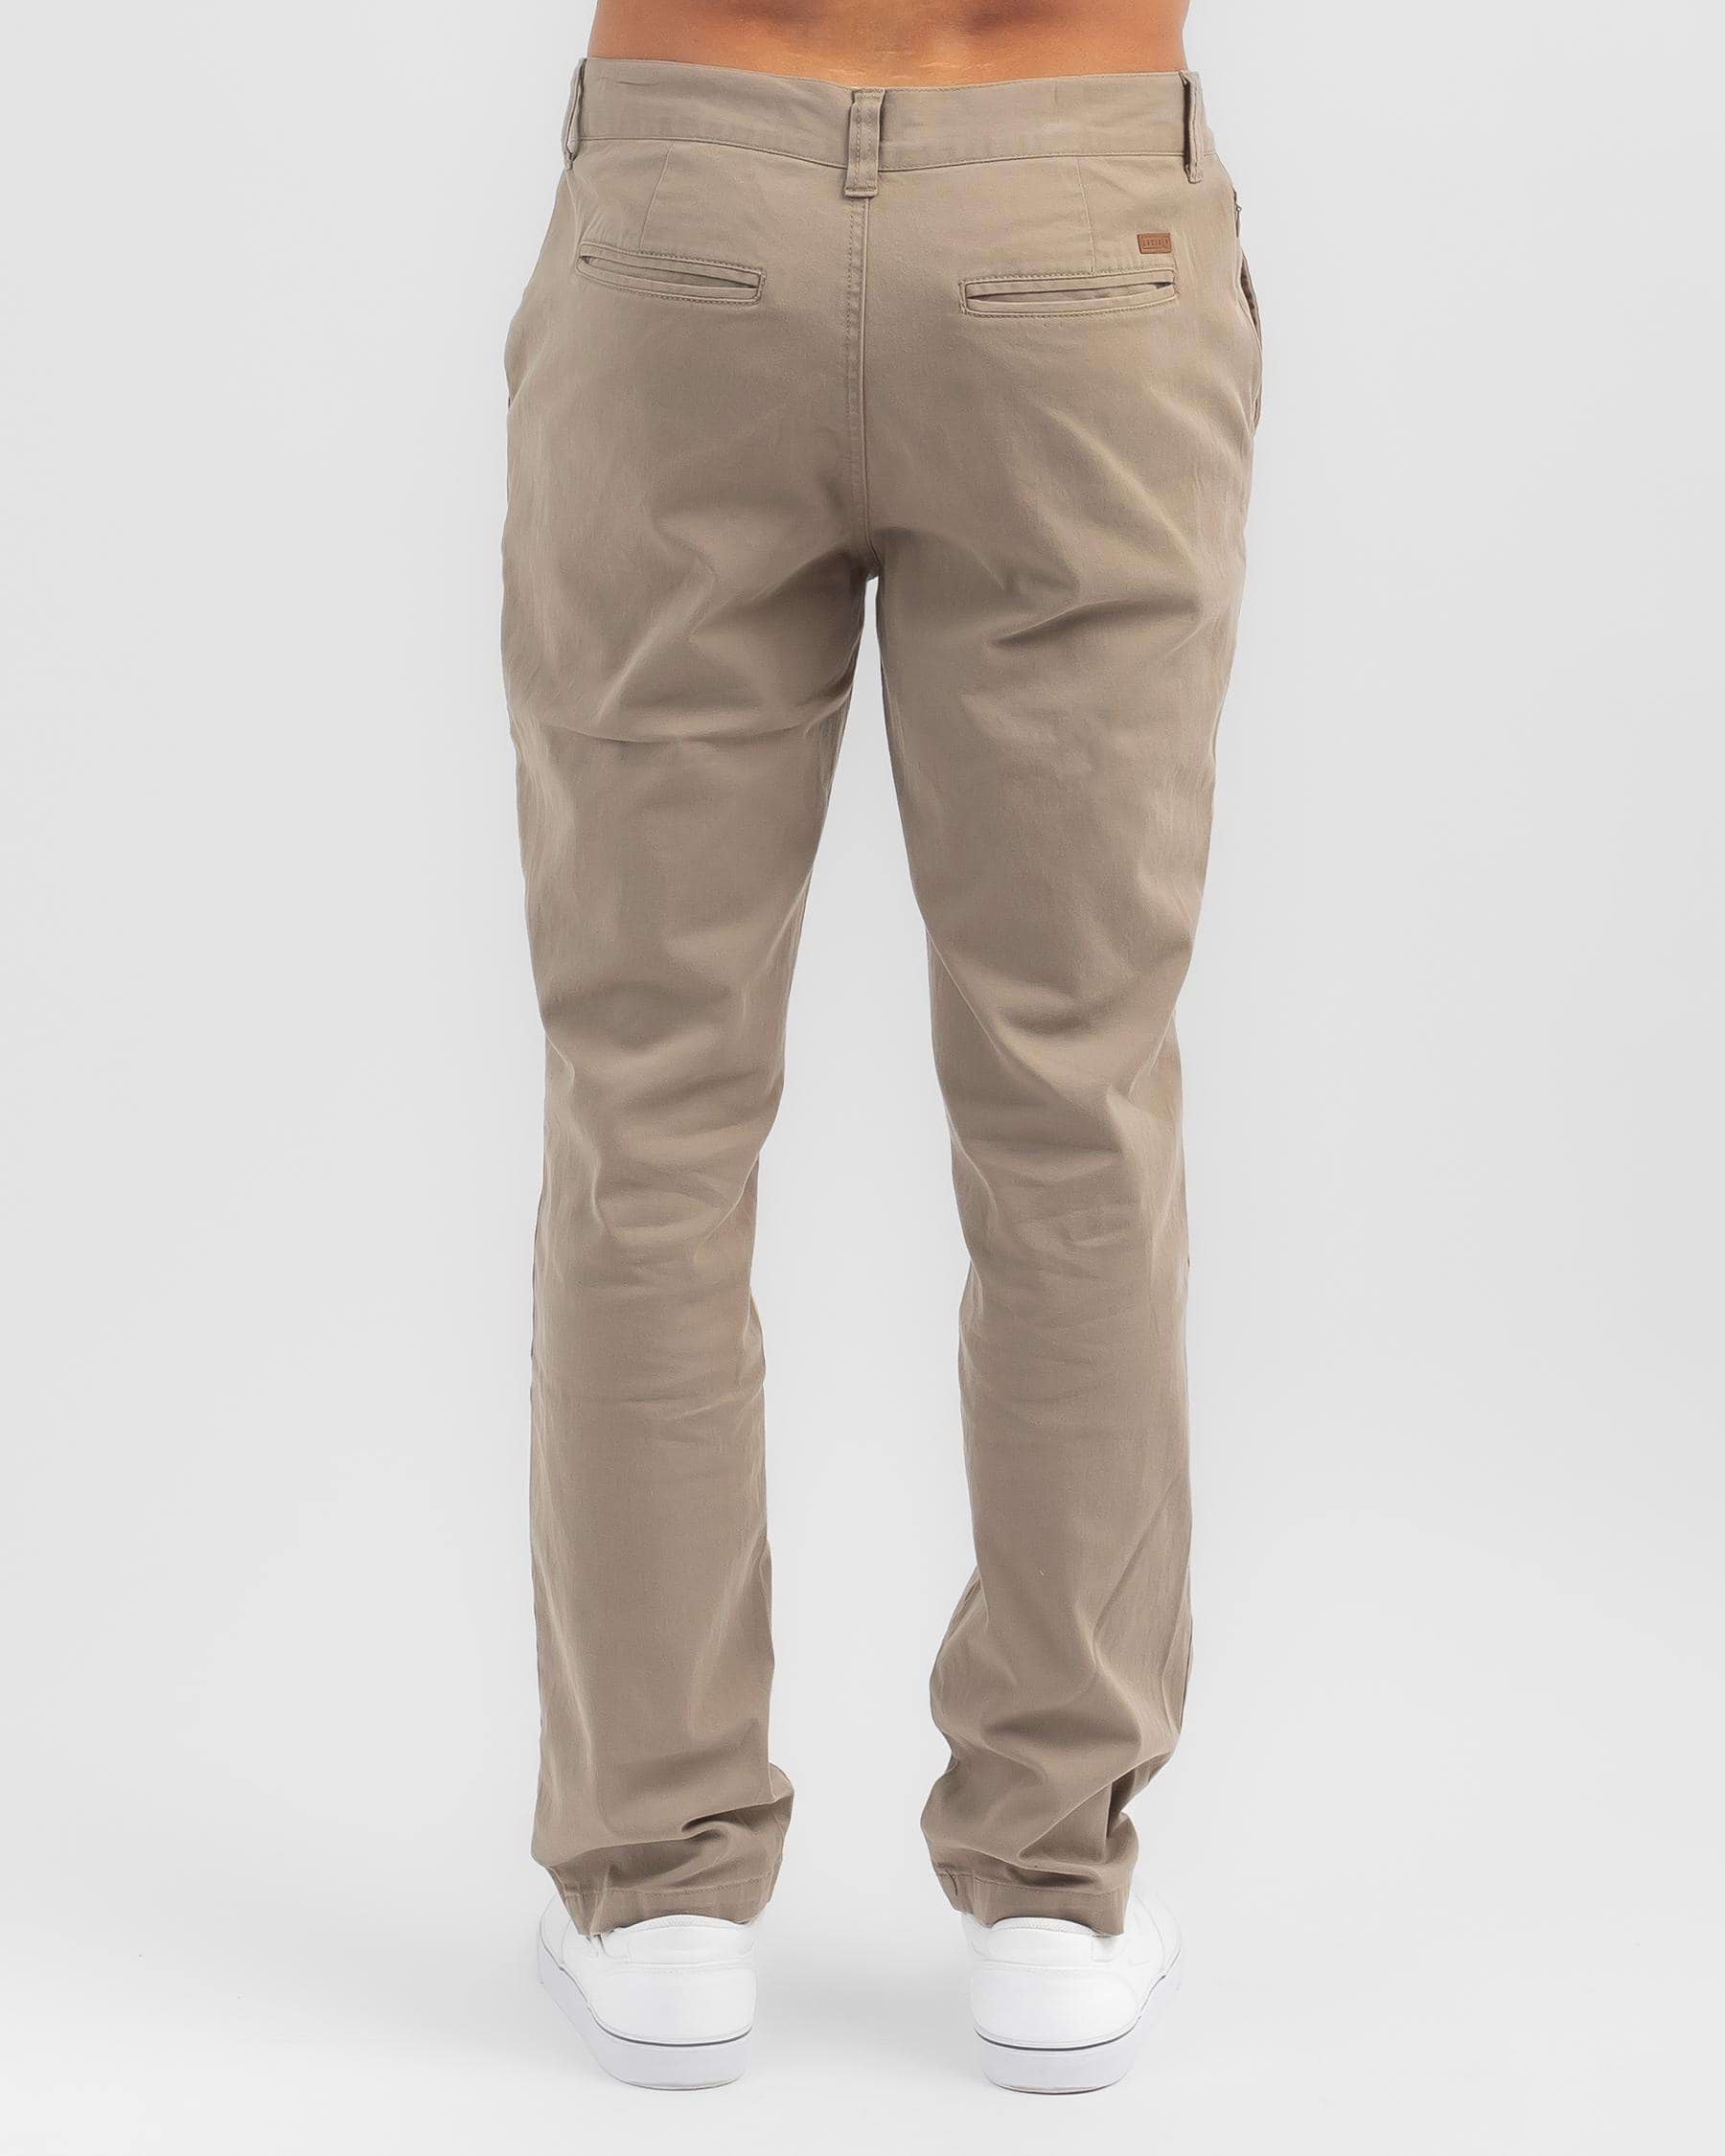 Lucid Direct Pants In Sand - Fast Shipping & Easy Returns - City Beach ...